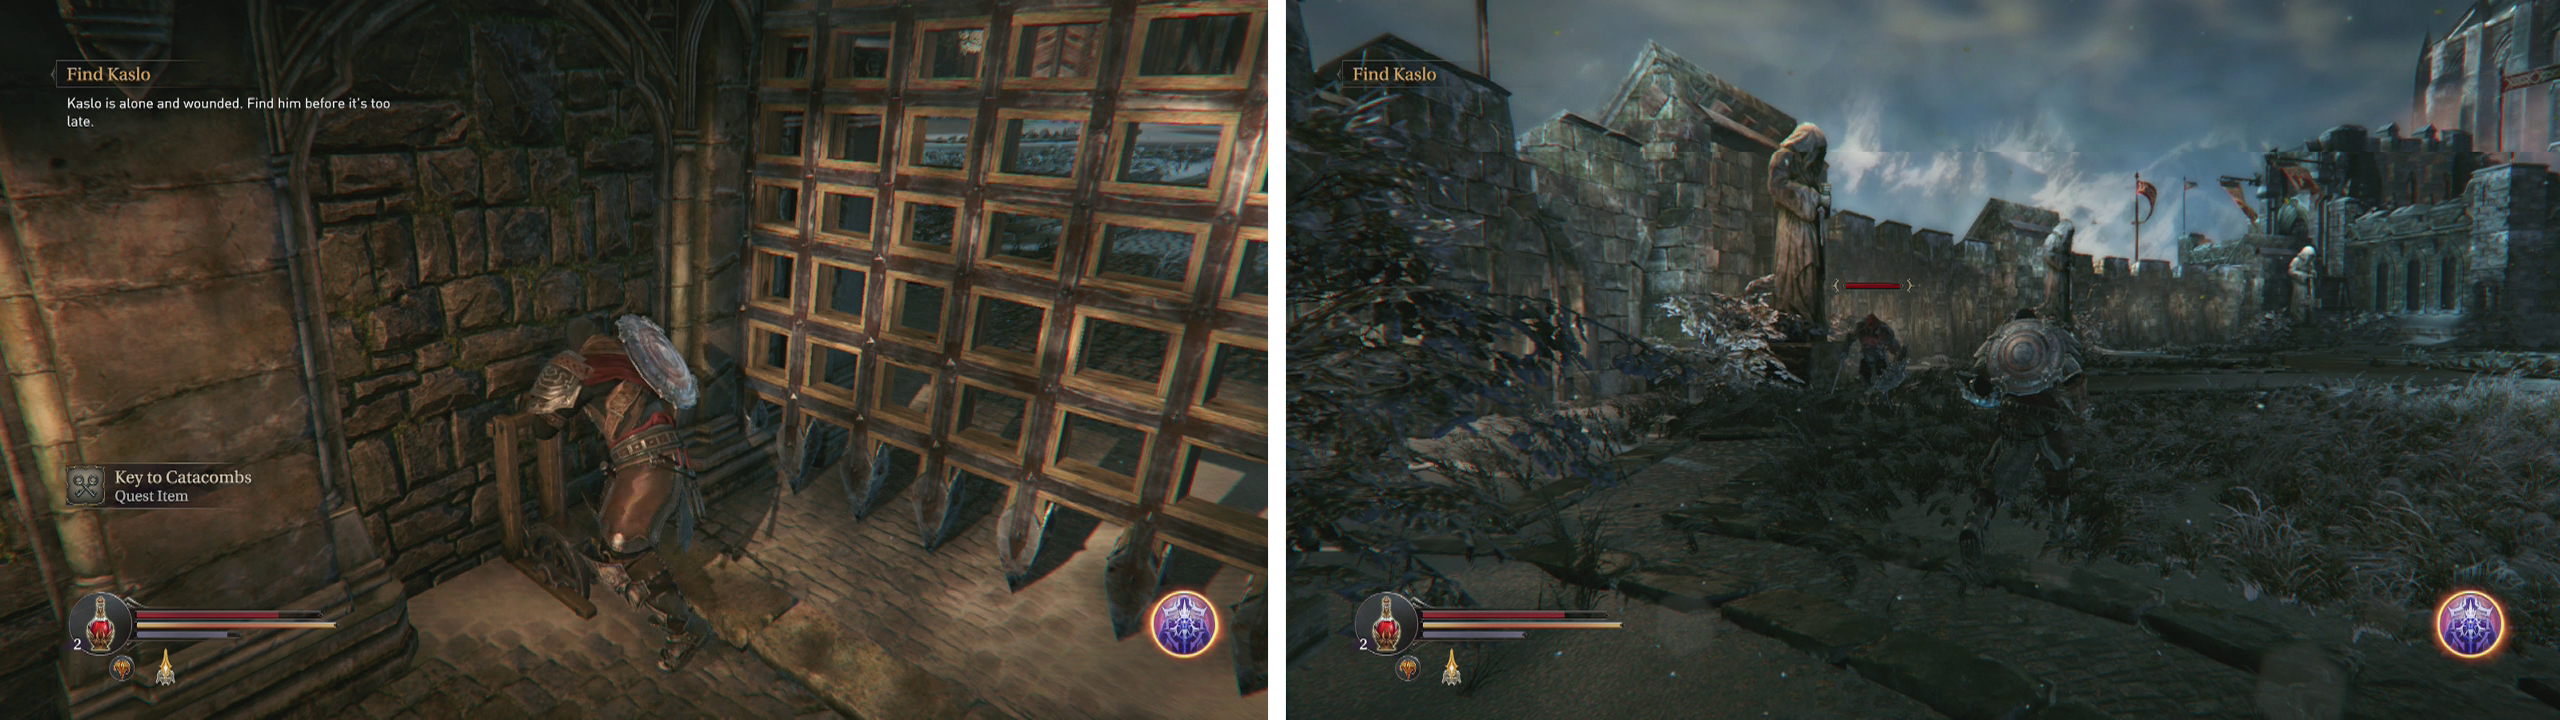 Pull the lever to open the gate (left). Enter the area and place the Shard of Heroes in your statue of choice before killing the enemies (right).